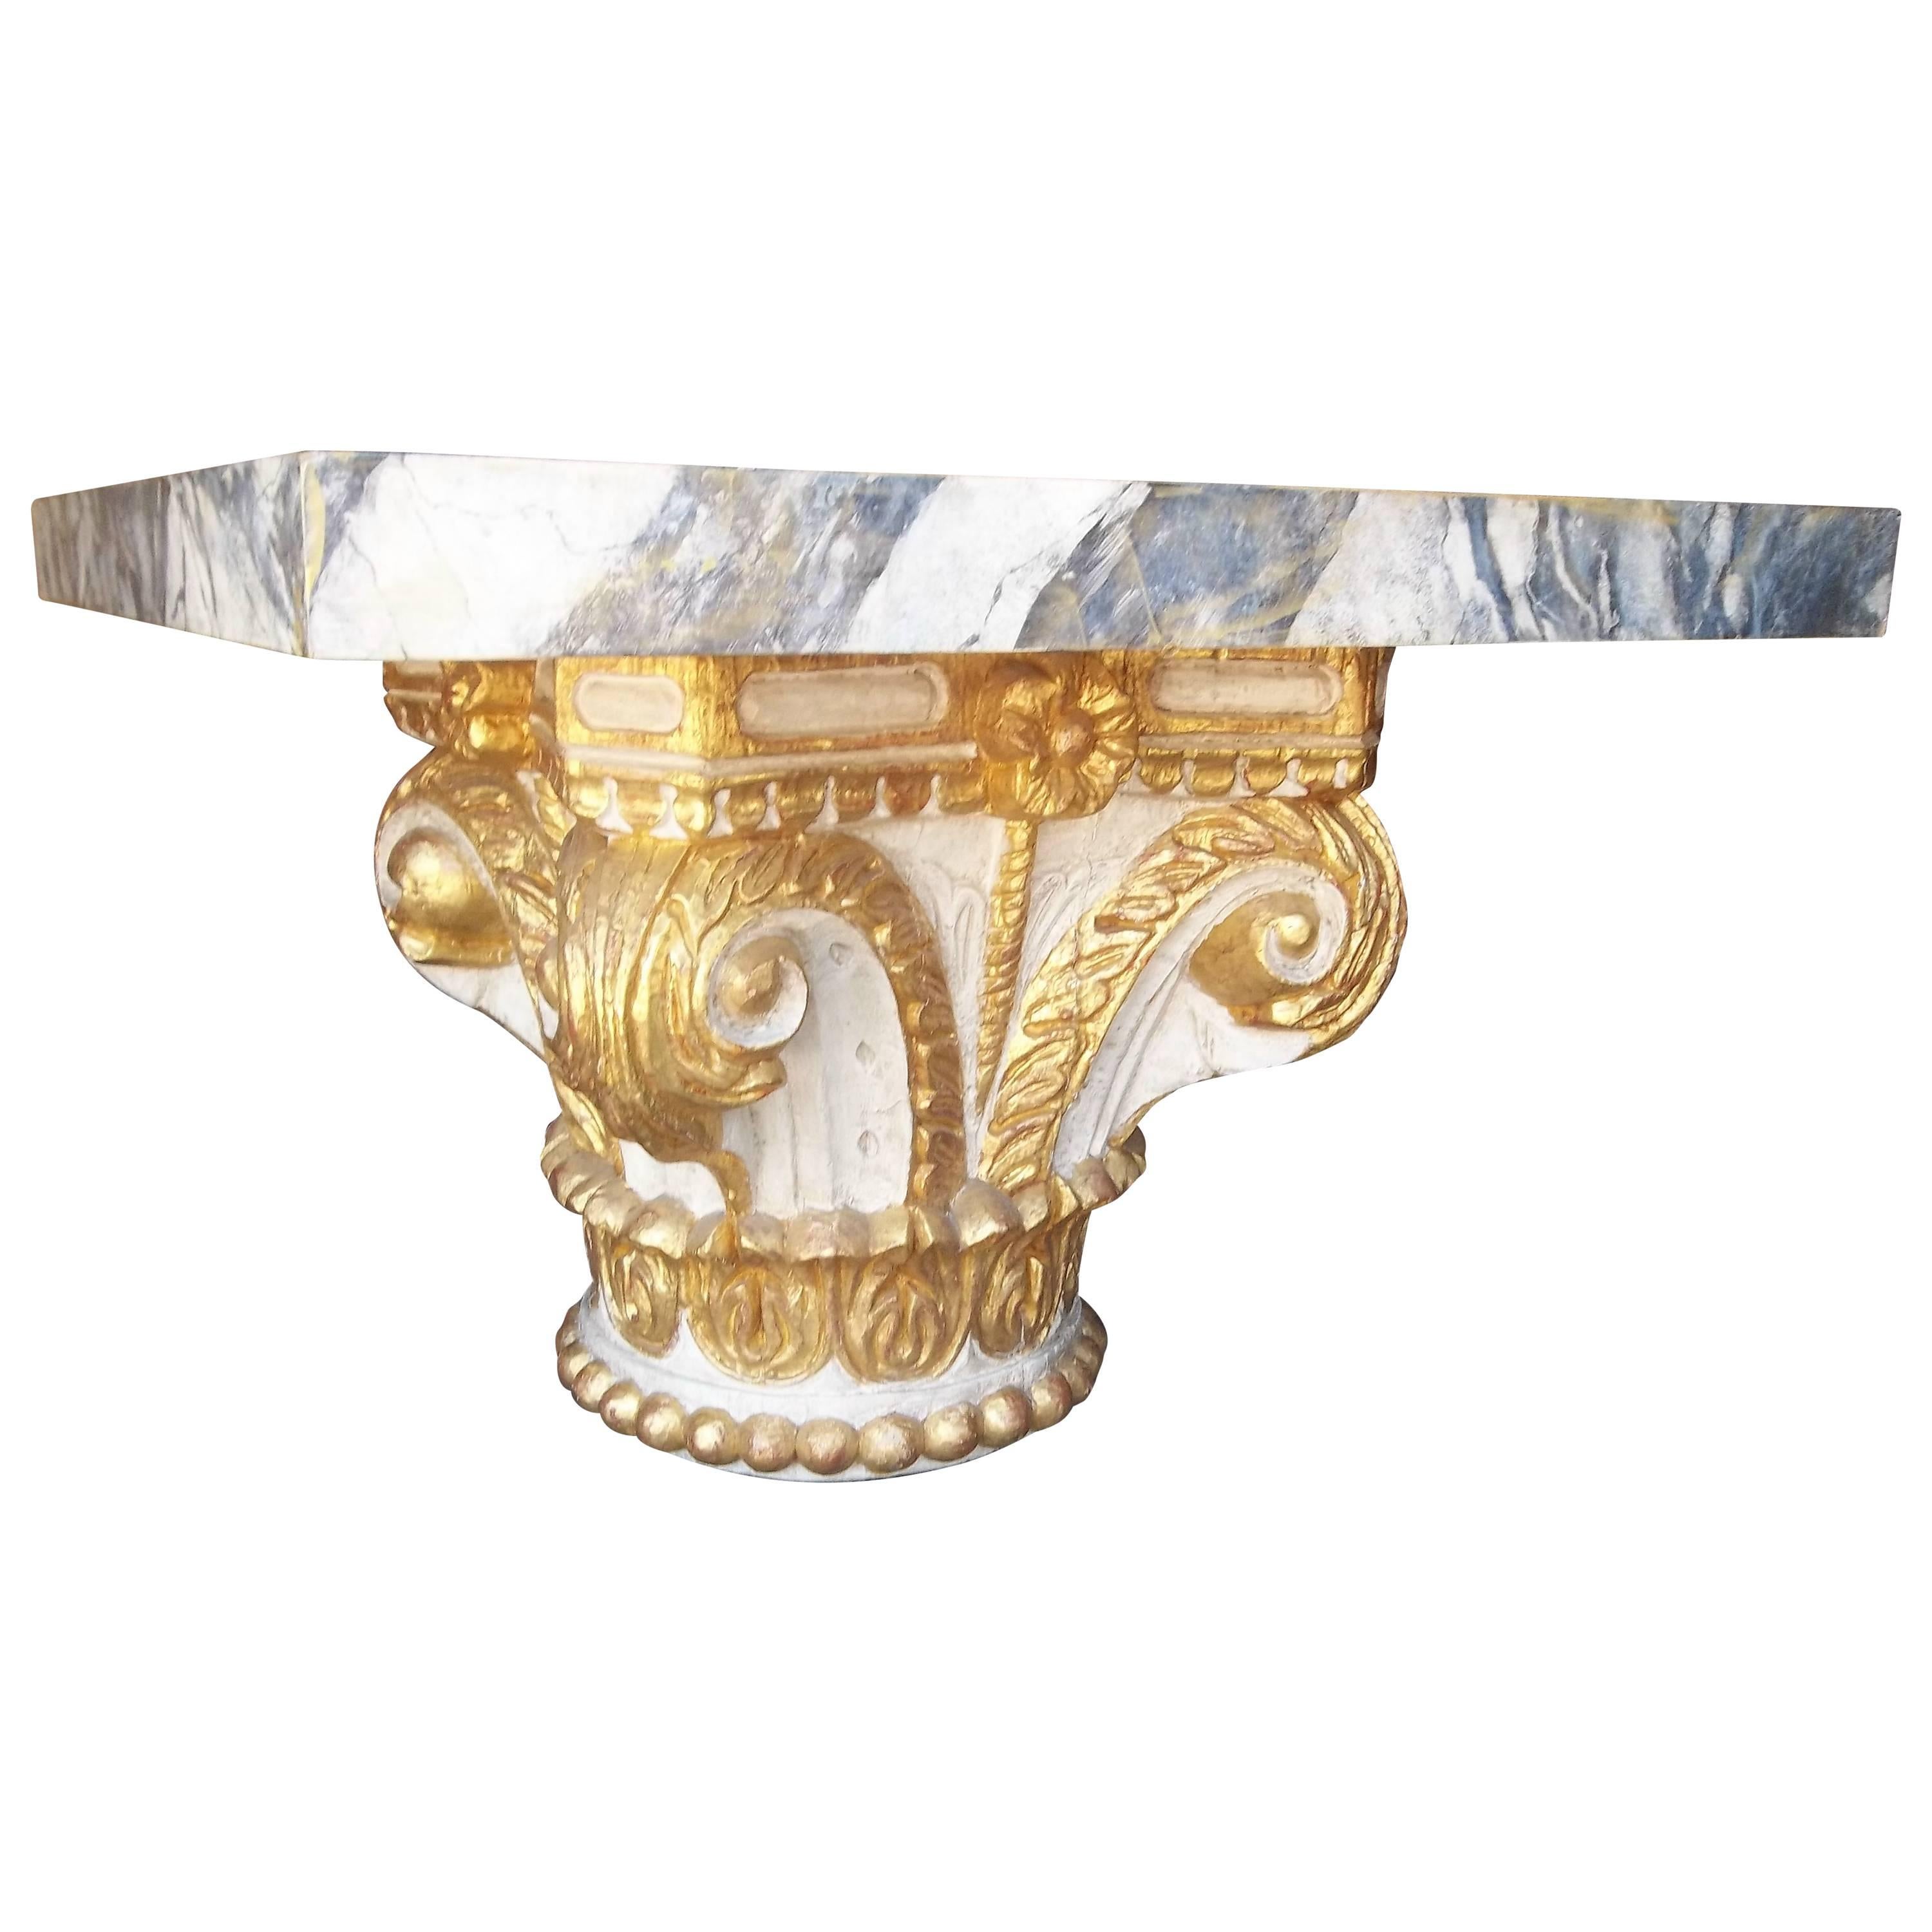 Giltwood and Paint Wood Corinthian Column Capital Fragment Now a Table